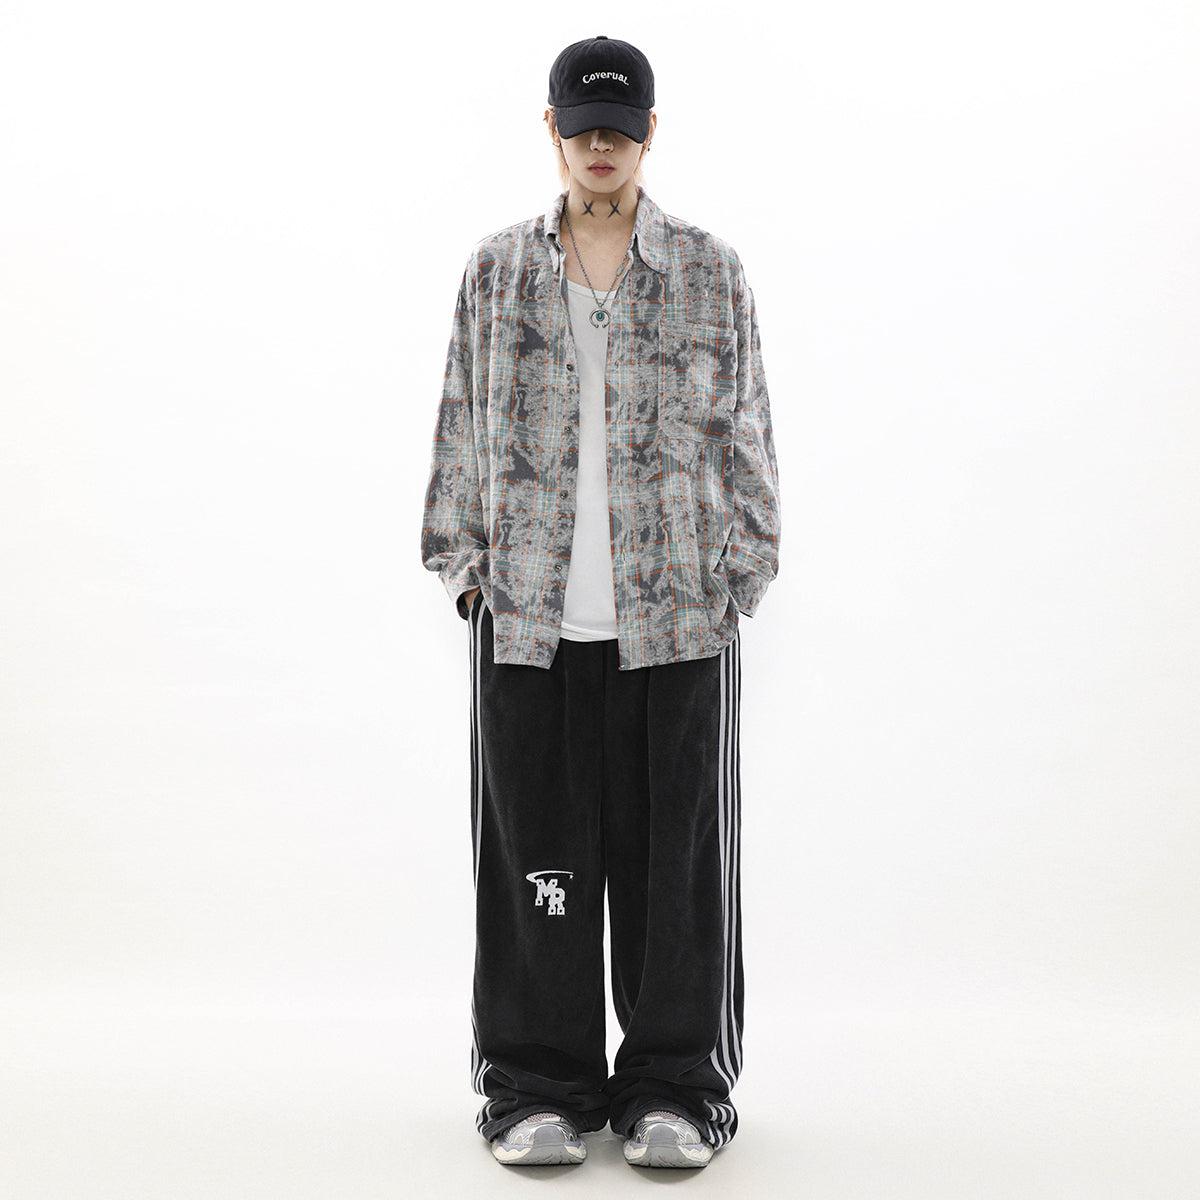 Mr Nearly Casual Plaid Long Sleeve Shirt Korean Street Fashion Shirt By Mr Nearly Shop Online at OH Vault